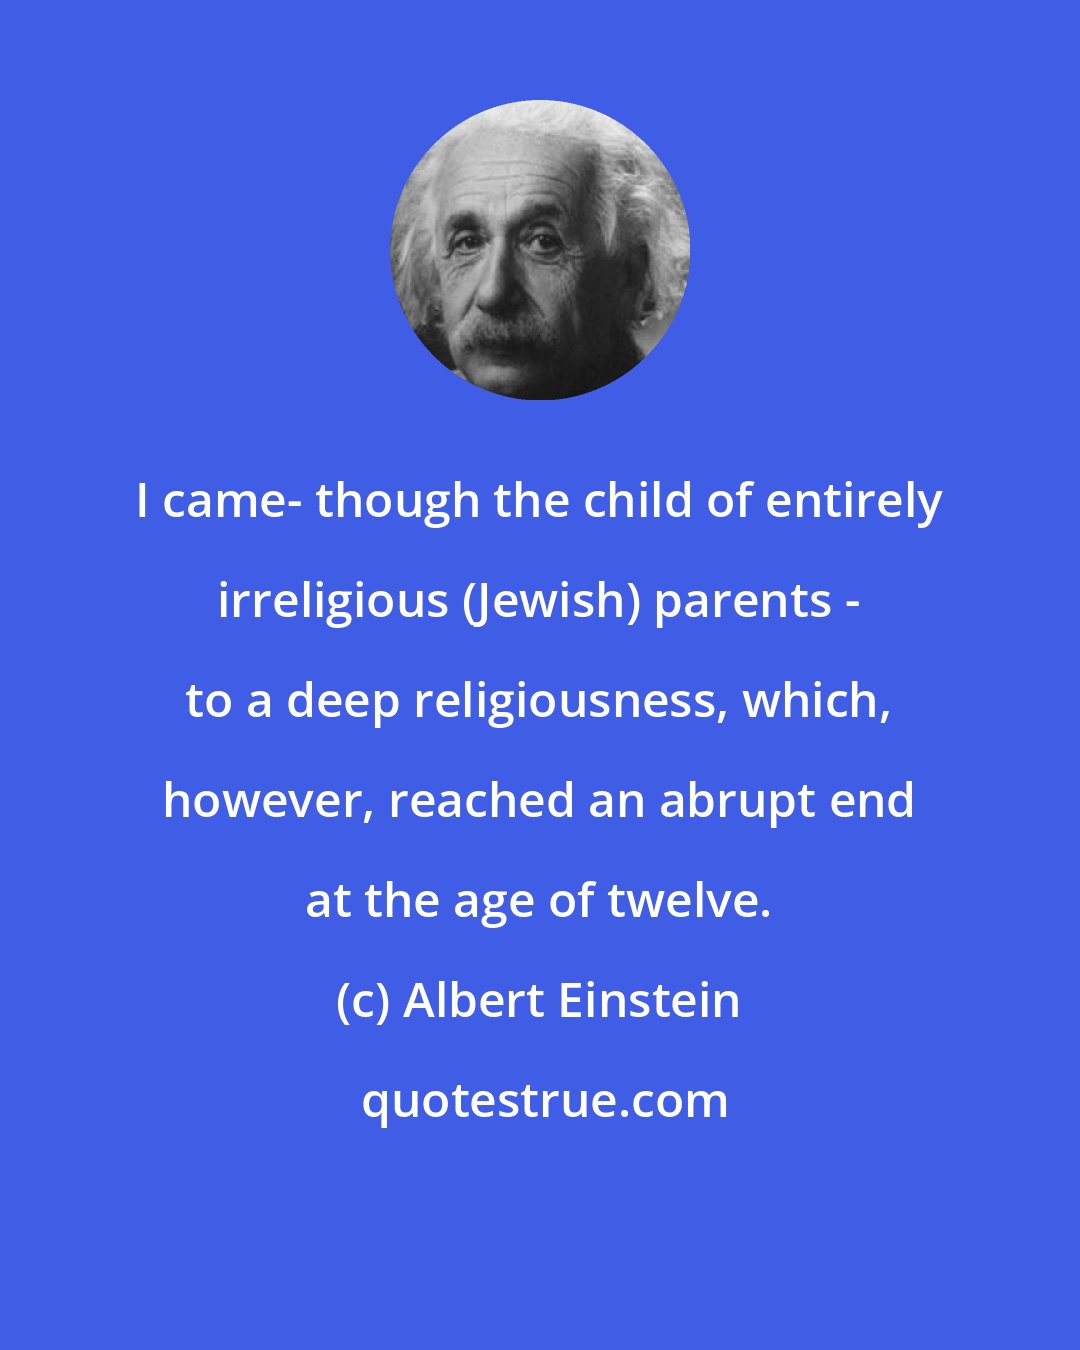 Albert Einstein: I came- though the child of entirely irreligious (Jewish) parents - to a deep religiousness, which, however, reached an abrupt end at the age of twelve.